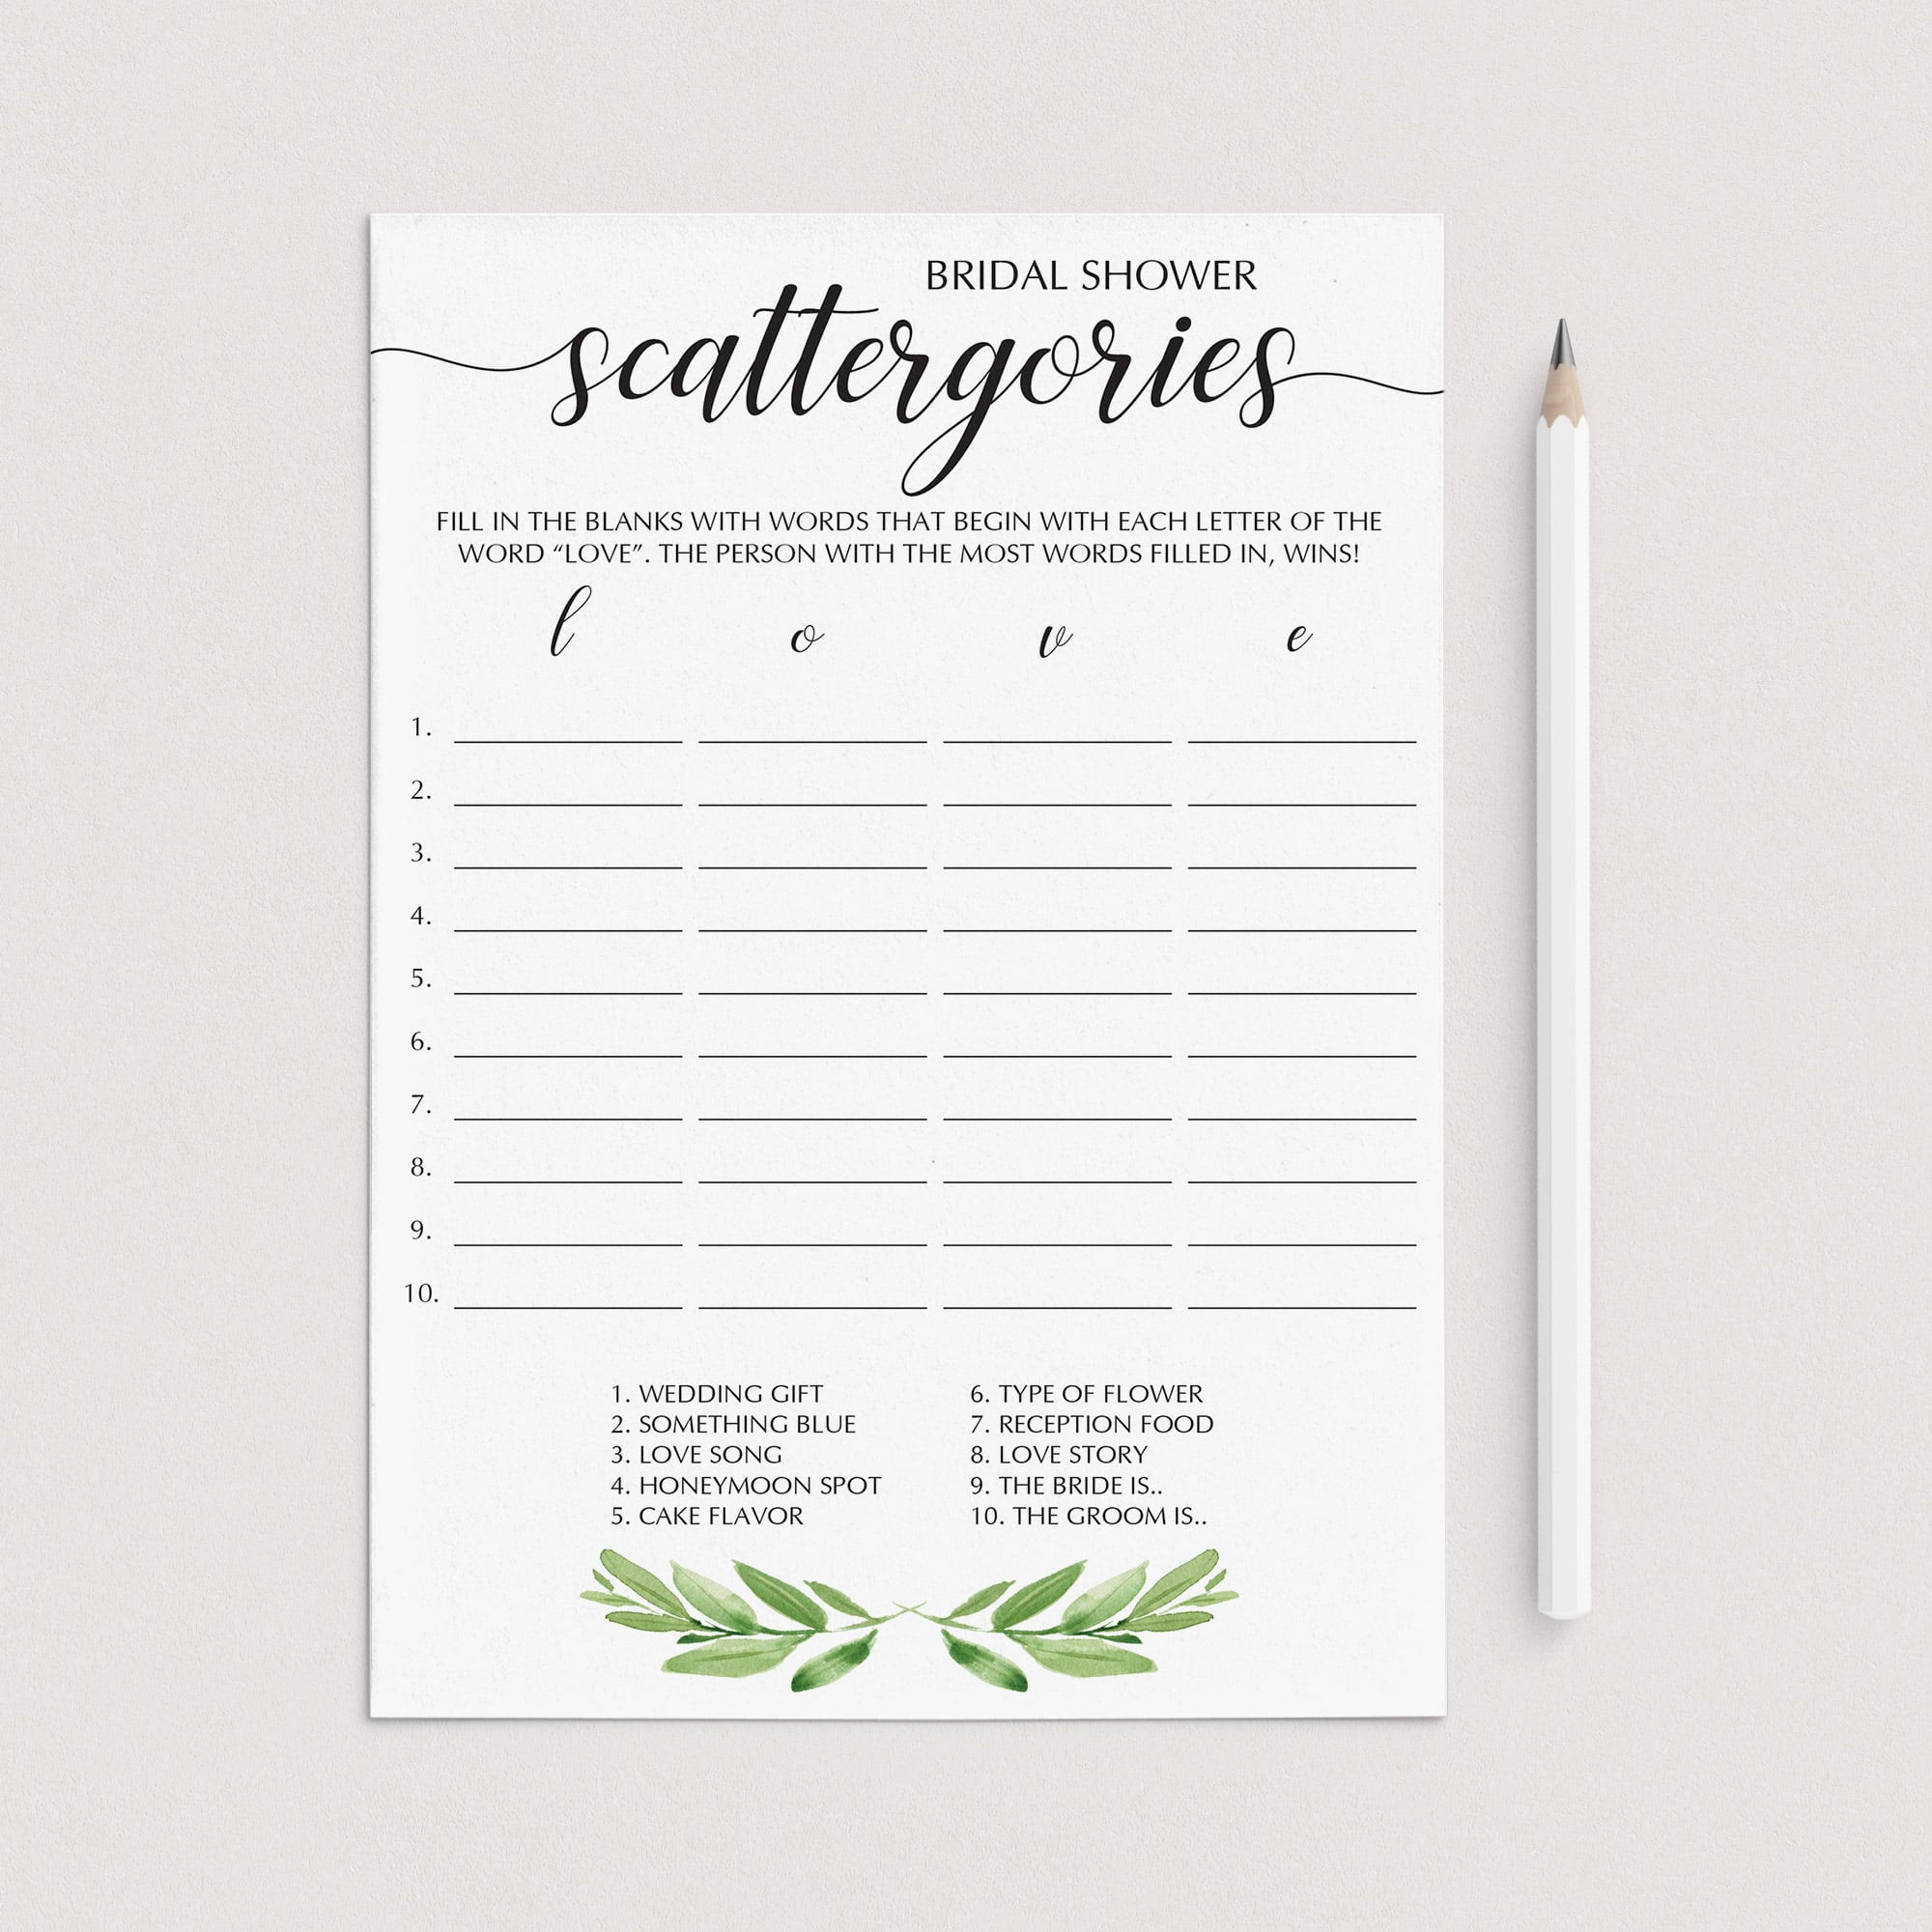 Greenery bridal shower game ideas scattergories by LittleSizzle